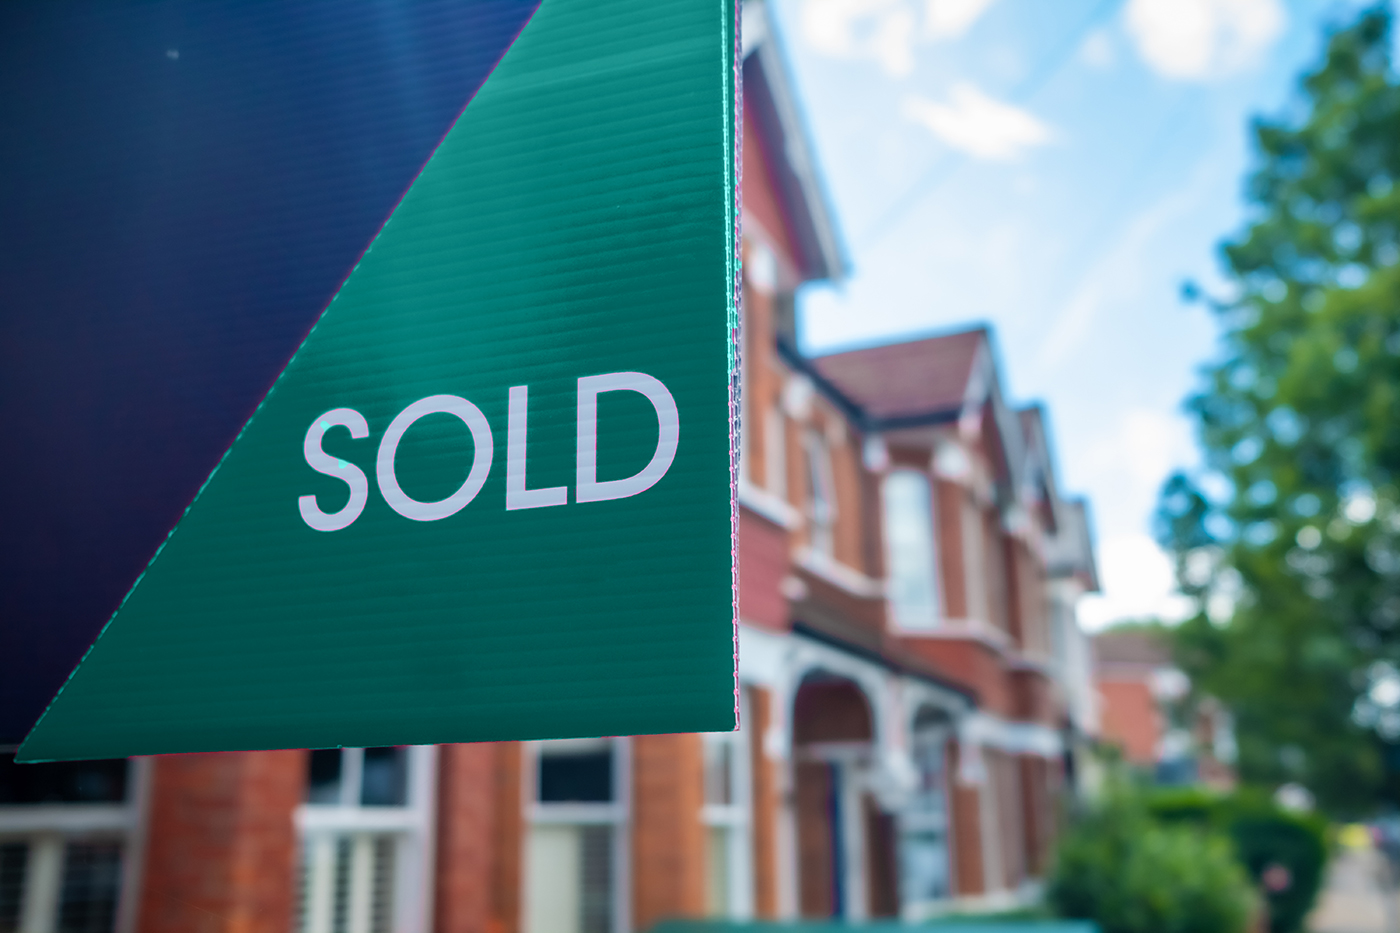 Russell-Cooke-Conveyancing fee information. Image of a for sale sign with a blurred background containing terraced houses.